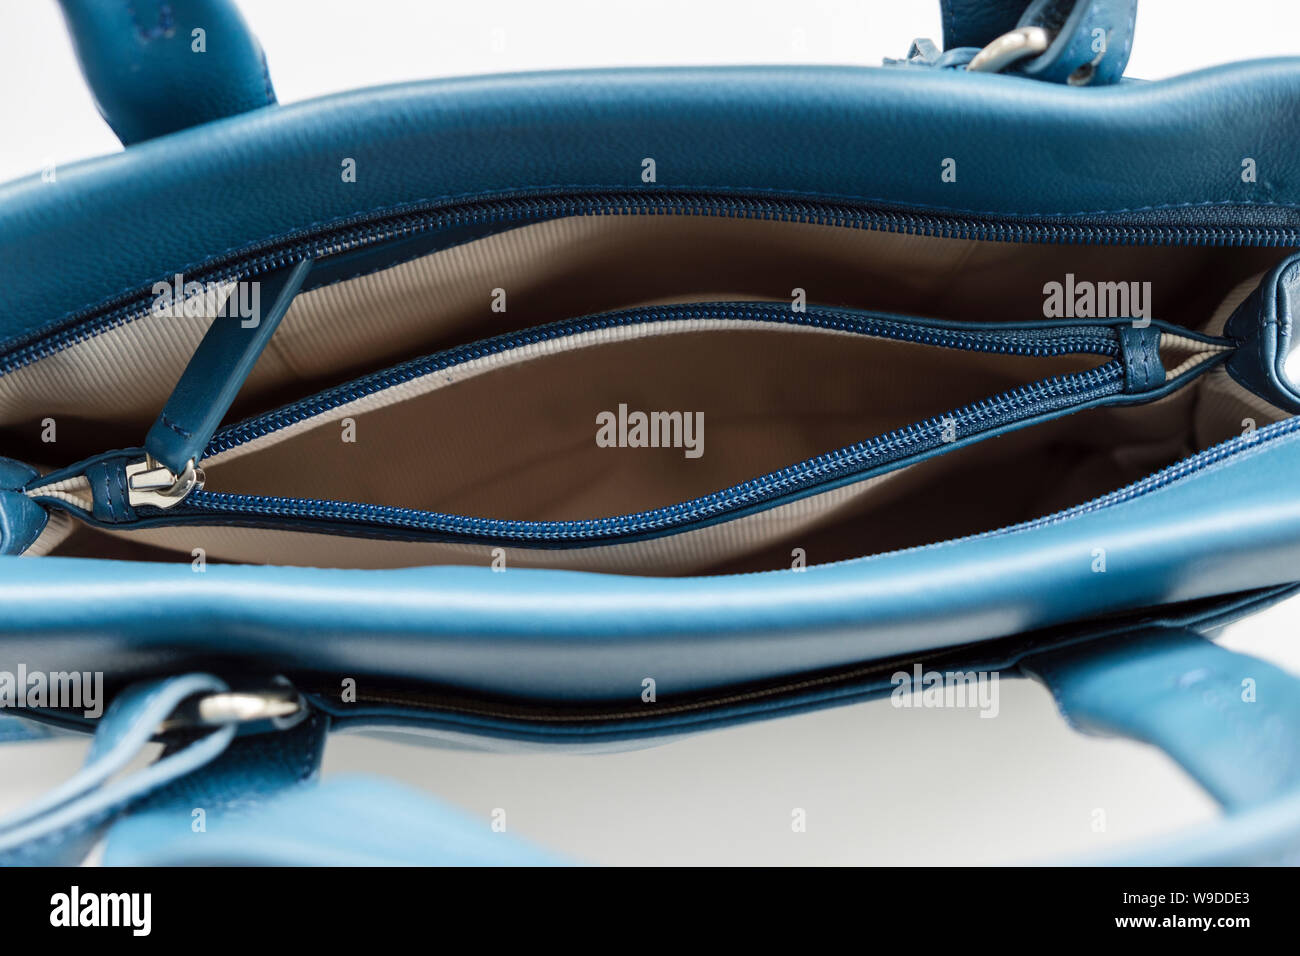 Top down view looking into an open zipped inner pocket compartment inside  an empty handbag purse from above Stock Photo - Alamy